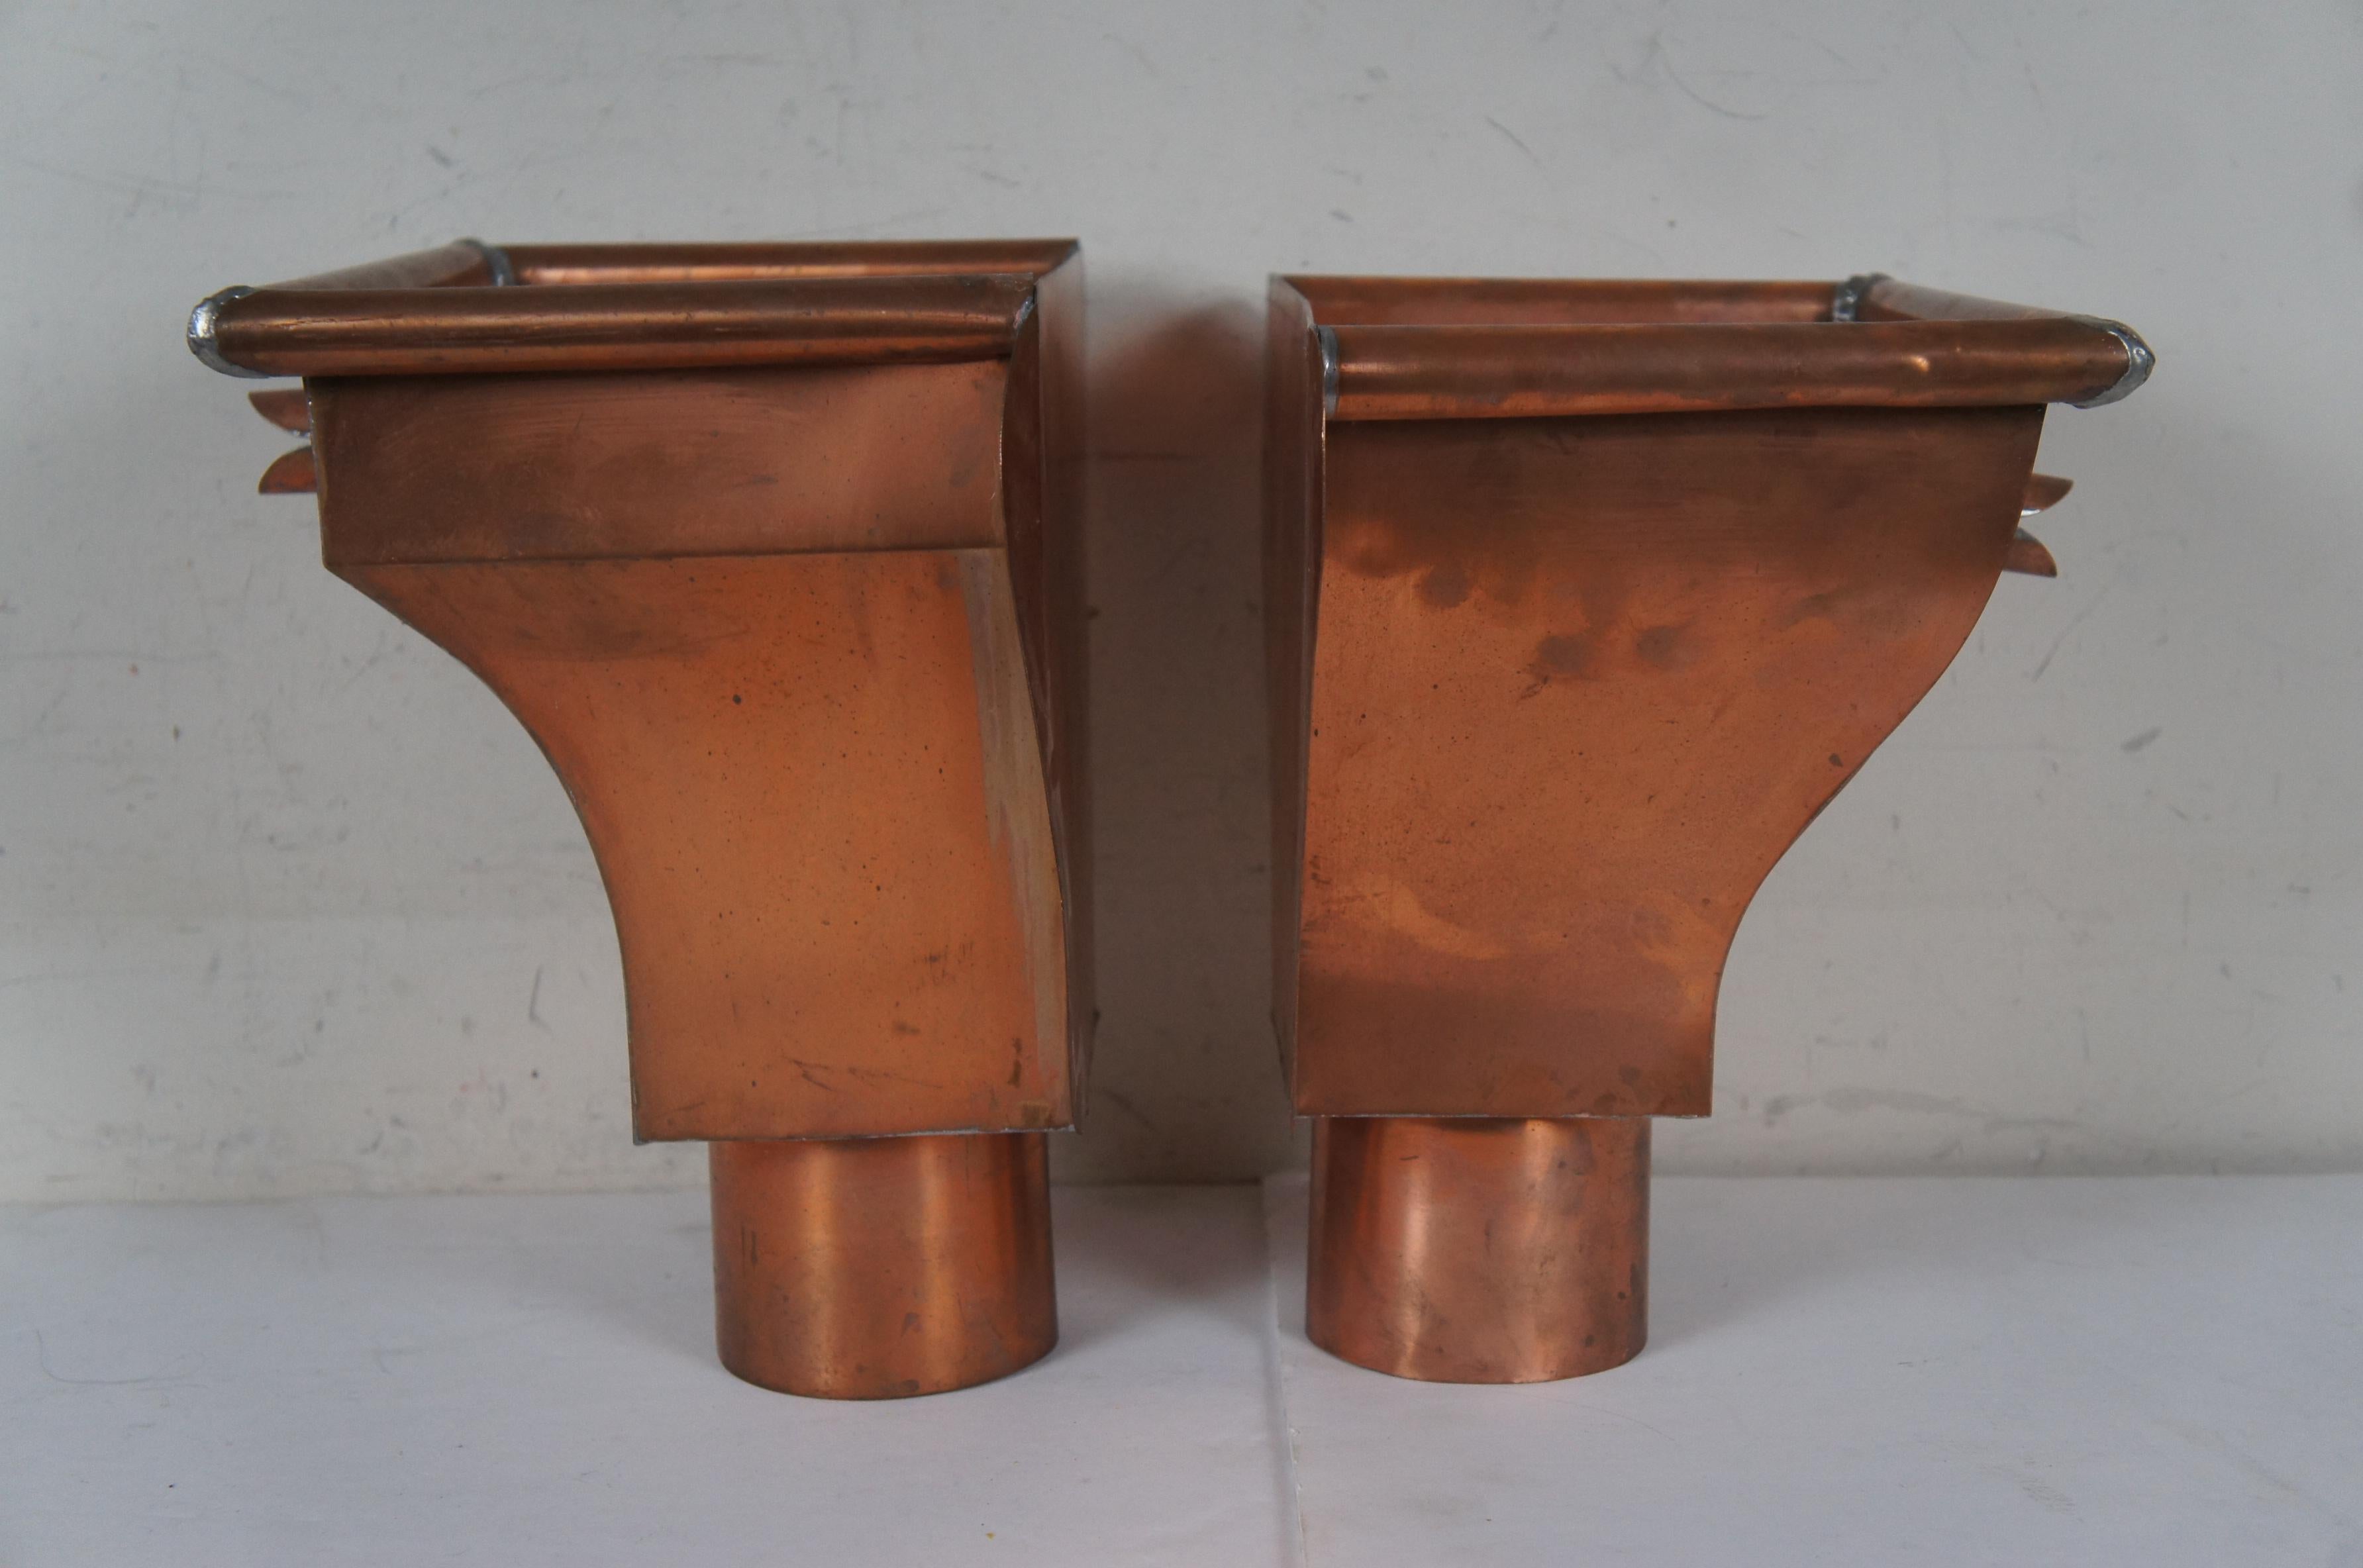 20th Century 2 Vintage Copper Gutter Leader Box Heads w/ Overflow Pipe Outlet Downspout 13